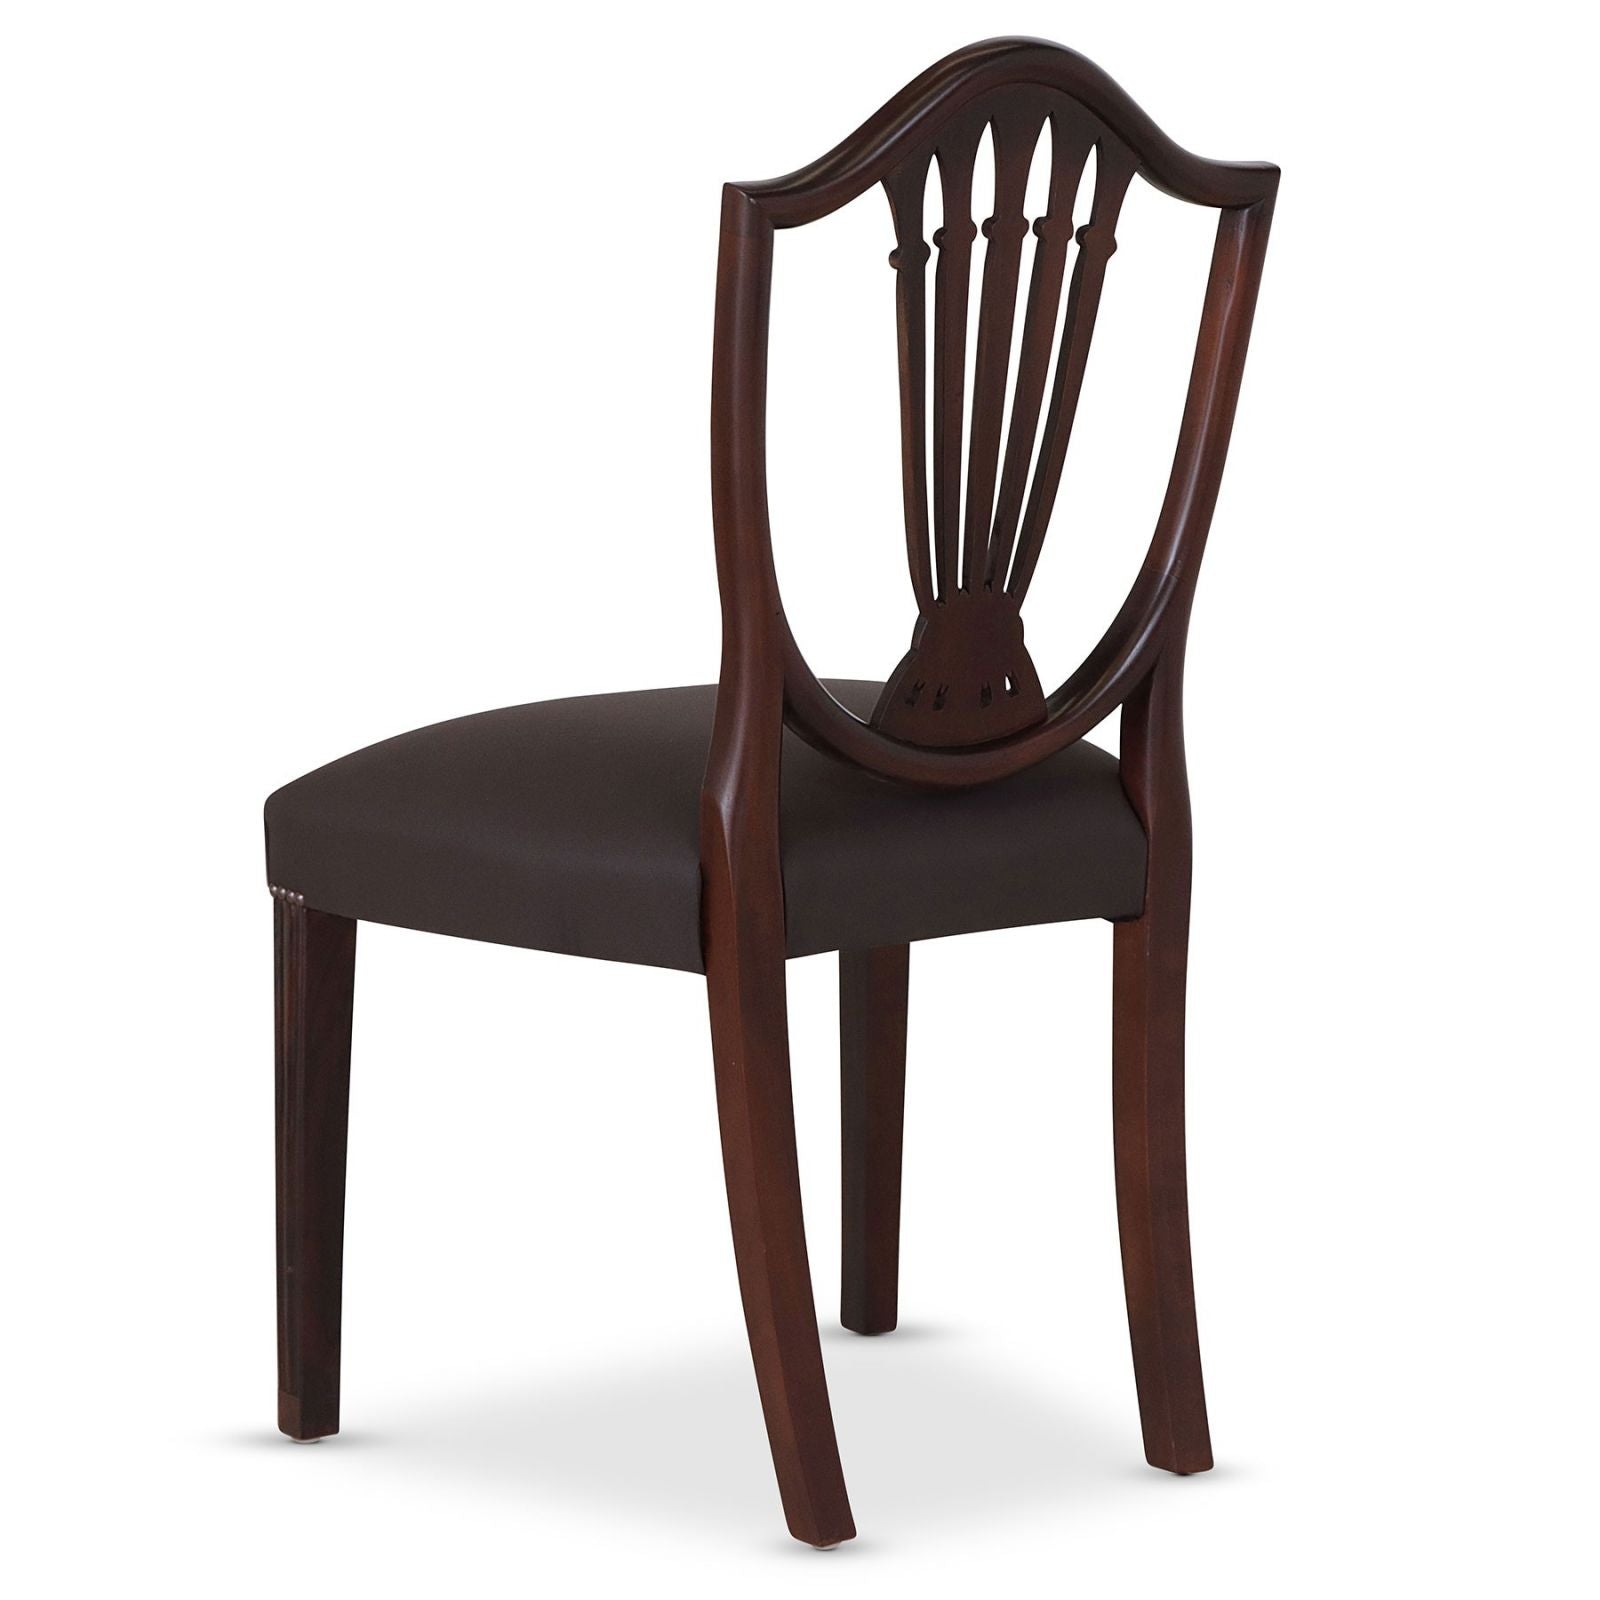 Hepplewhite style mahogany dining chair with leather seat